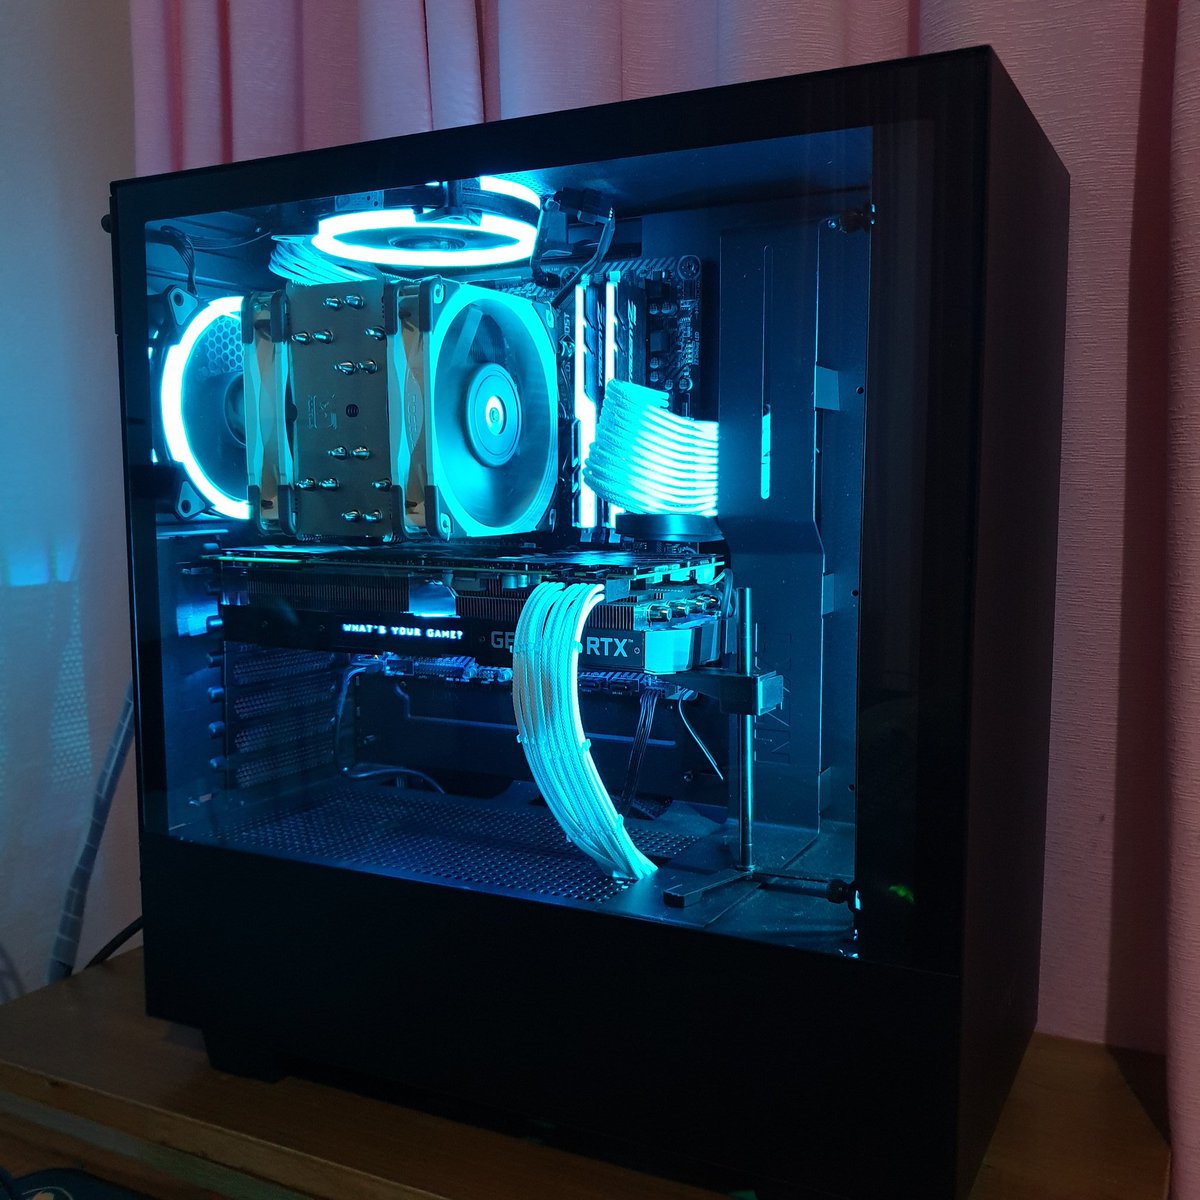 Ally Burns Nice Build I Made A Similar Build In An Nzxt Case Too Great Cases To Work With Refreshing To See Others Air Cool Too Often Better Performance